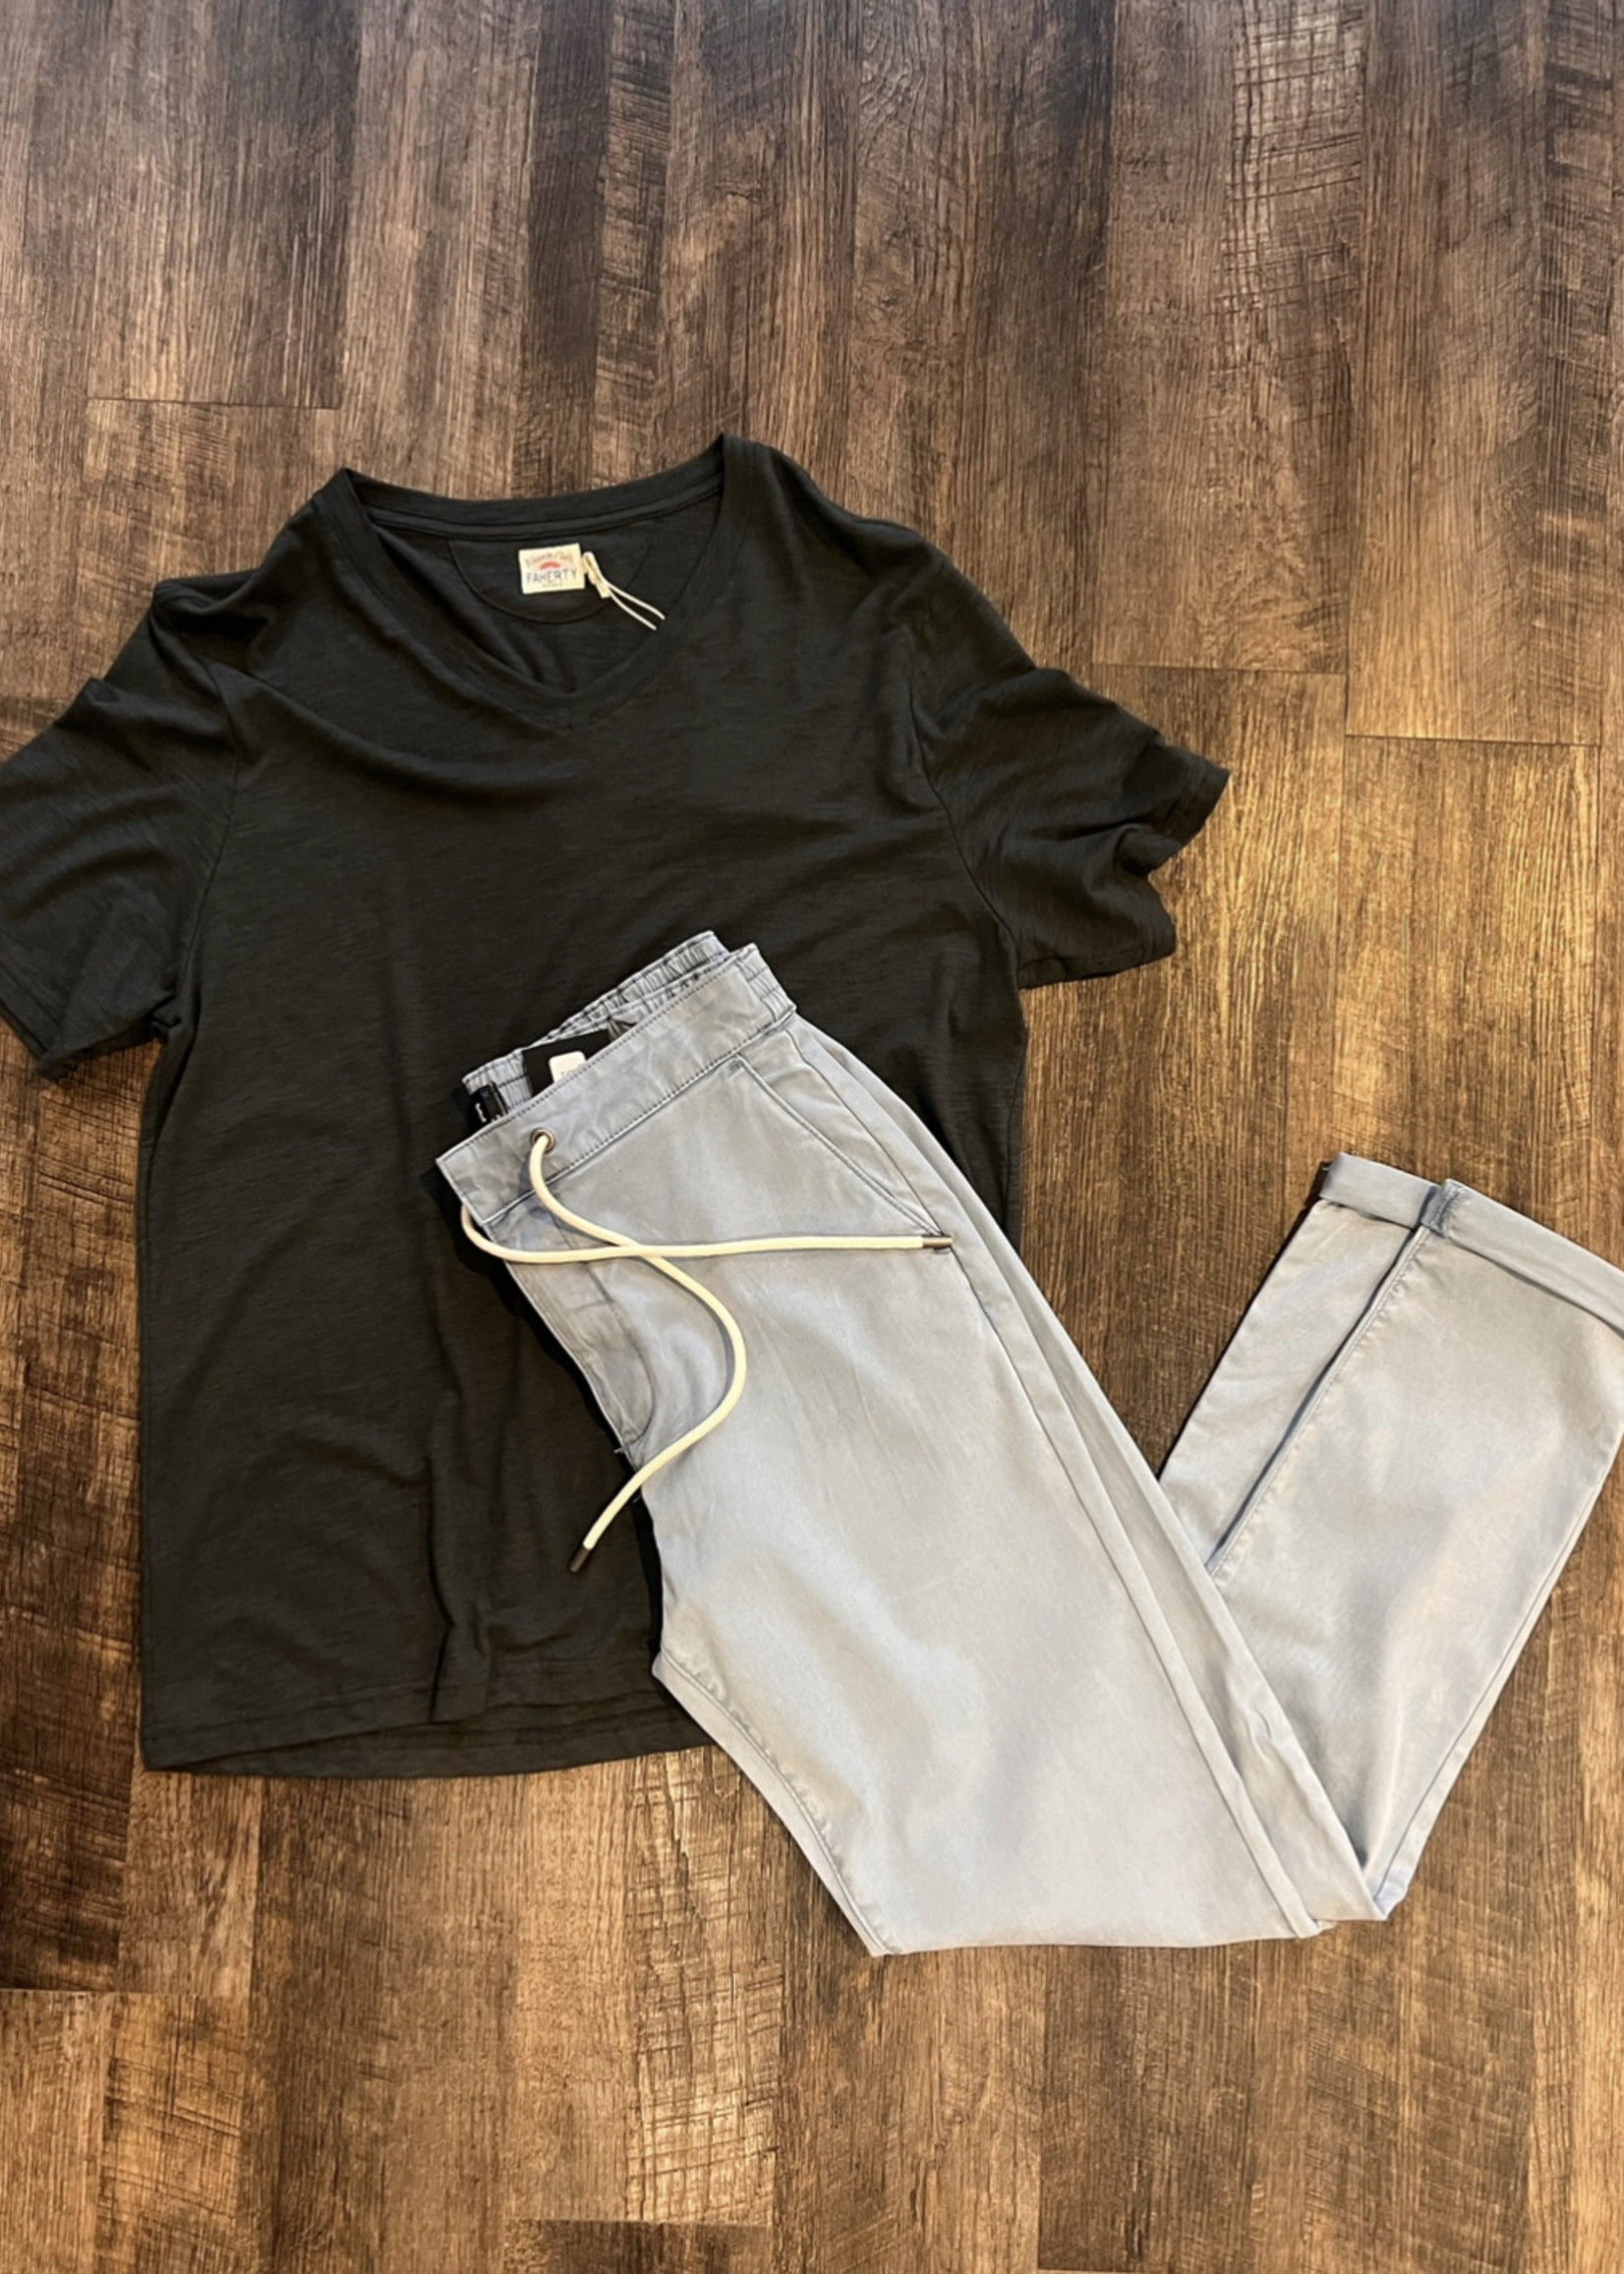 Faherty V-Neck Tee and Paige Fraser Pant